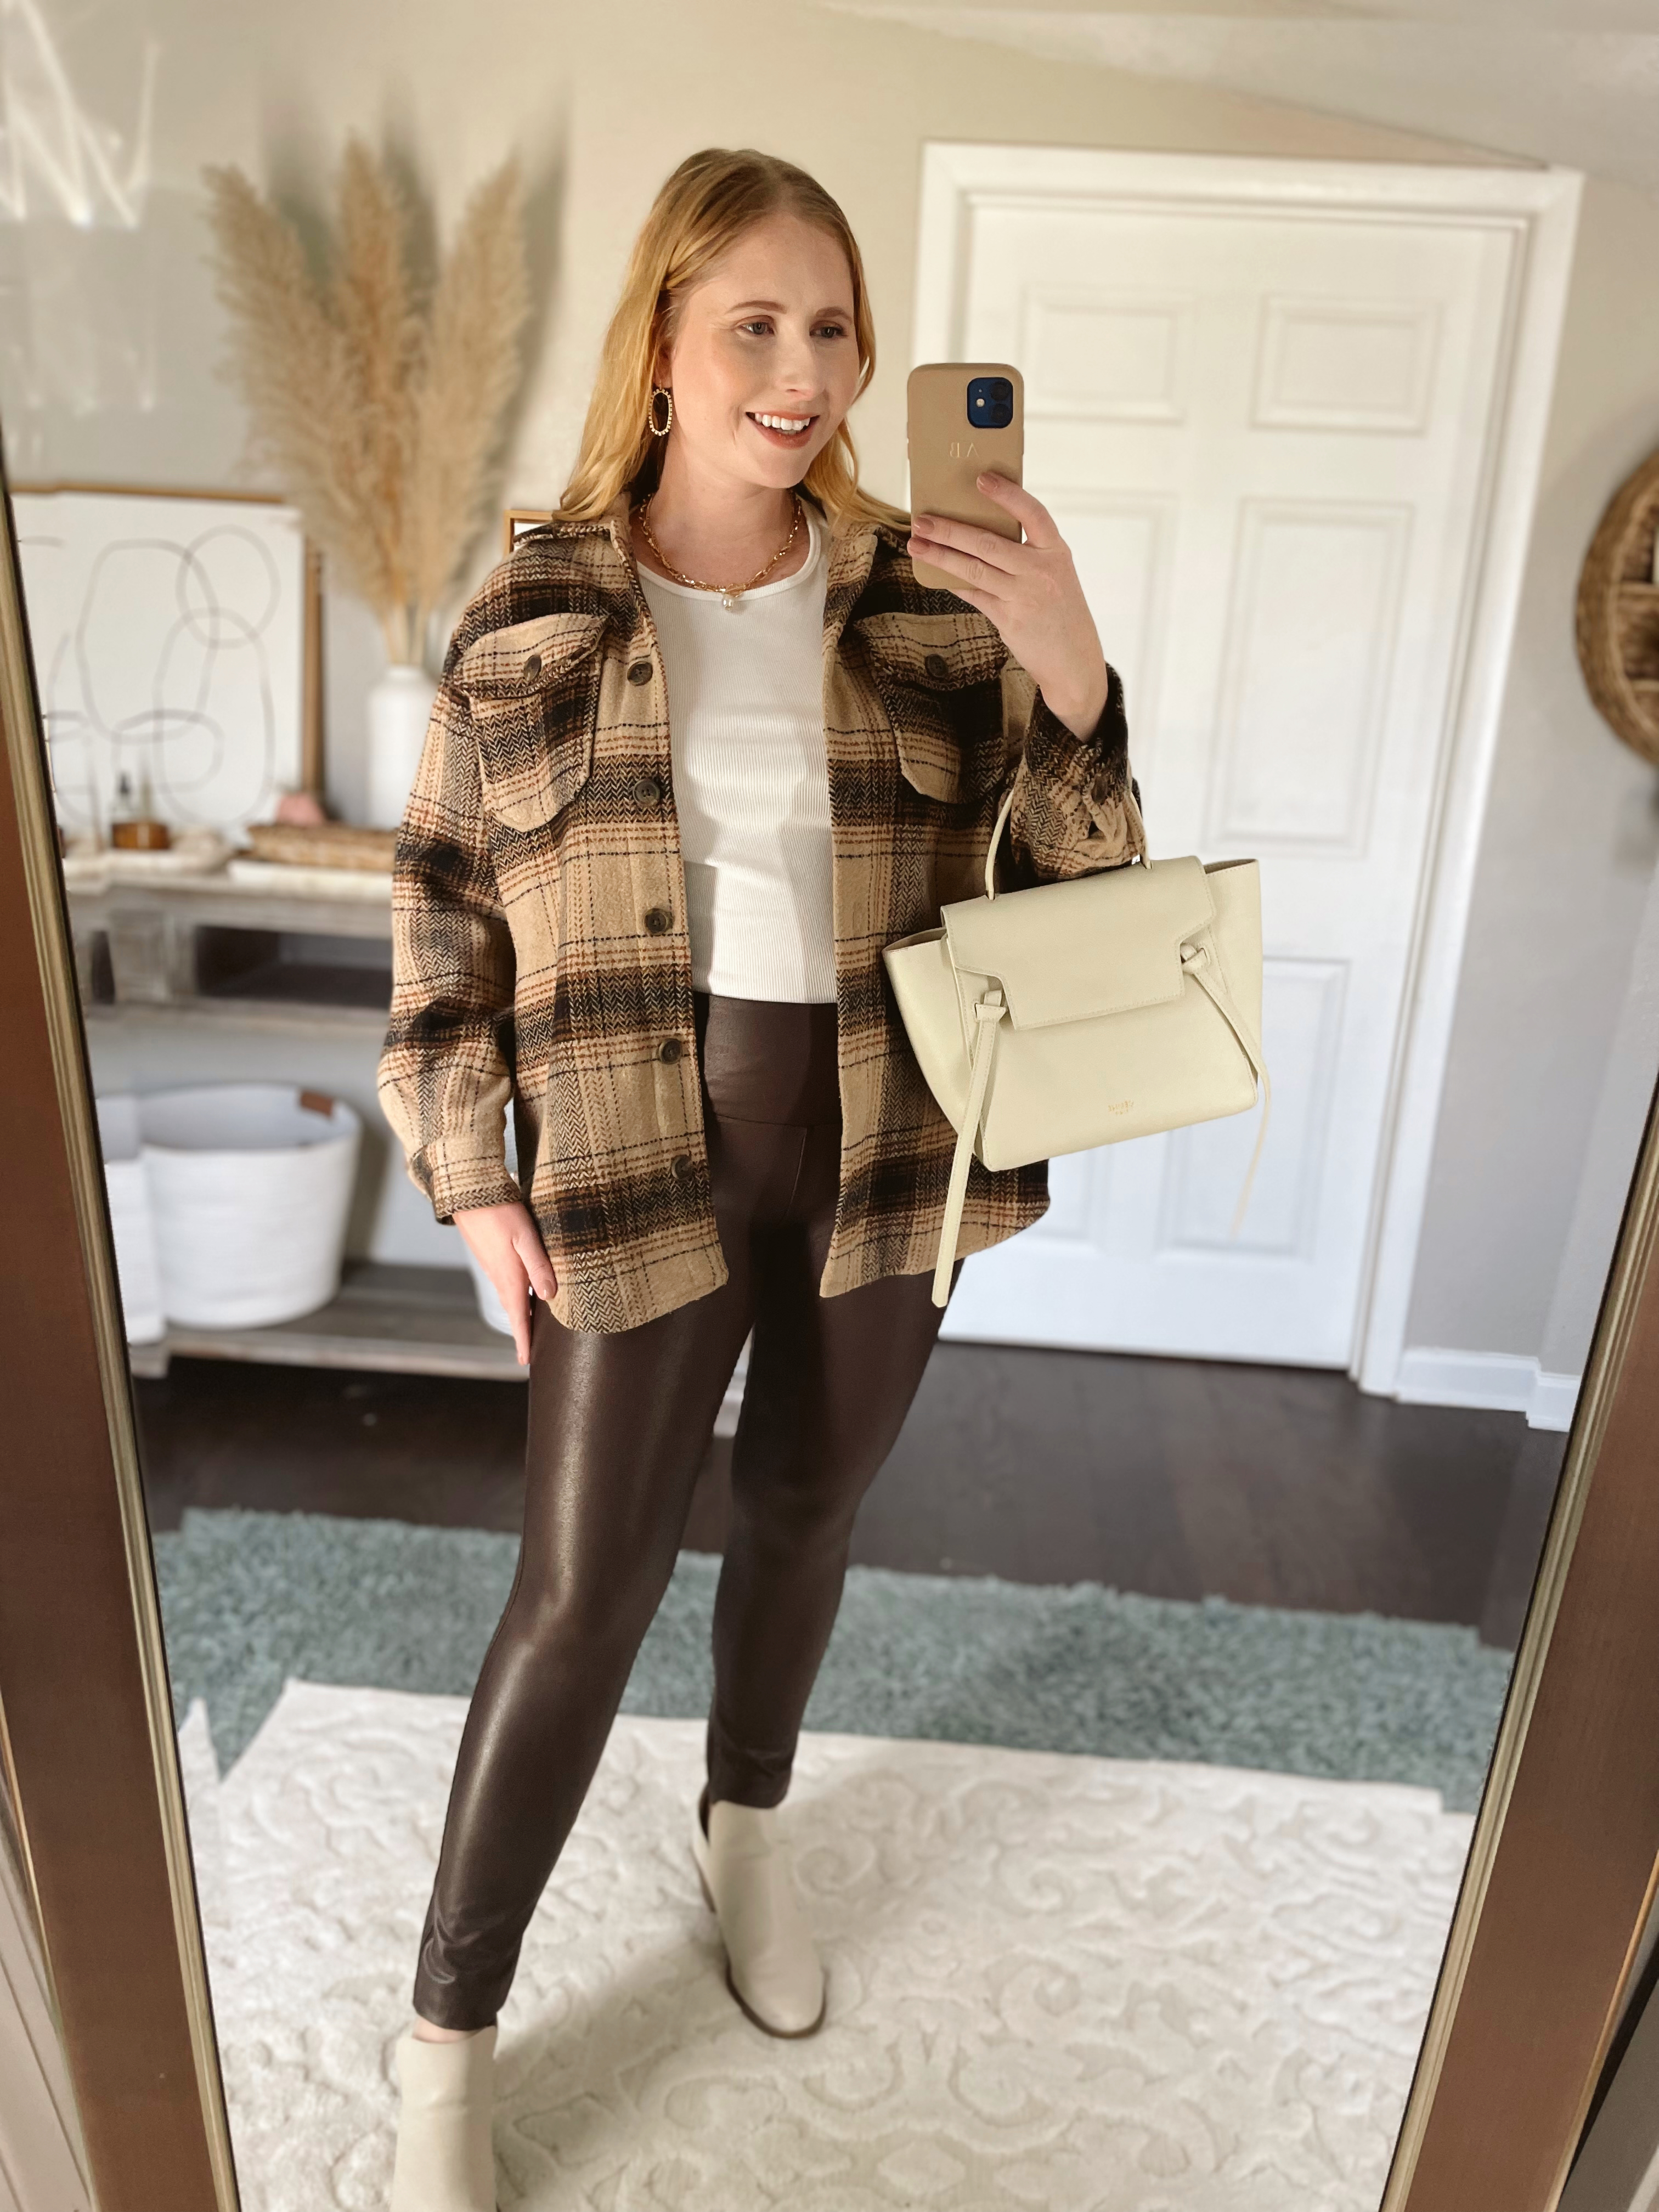 How to Style Faux Leather Pants - Affordable by Amanda